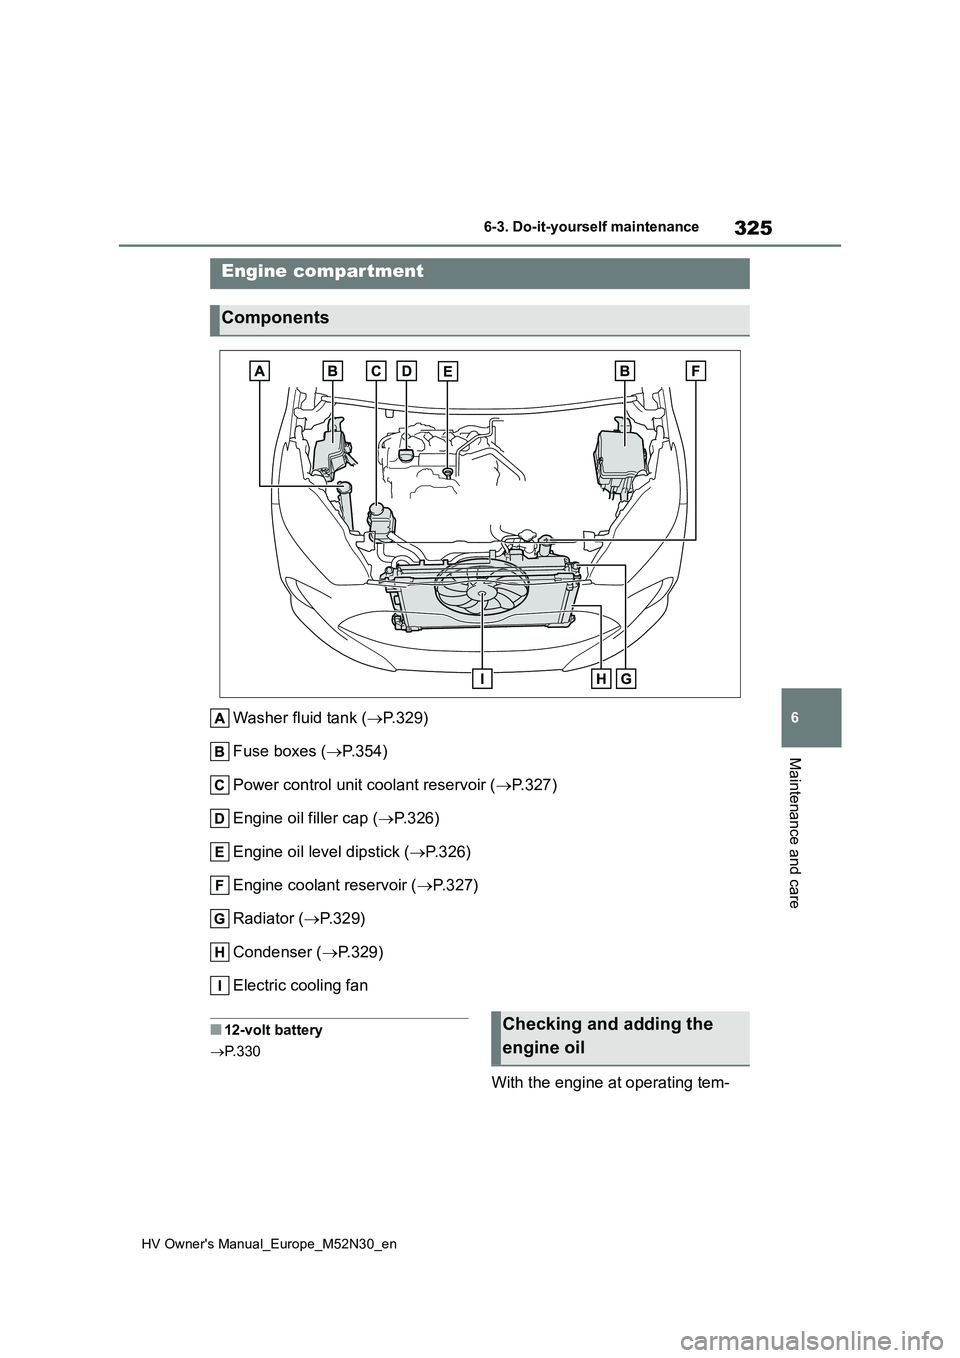 TOYOTA YARIS 2022  Owners Manual 325
6
HV Owner's Manual_Europe_M52N30_en
6-3. Do-it-yourself maintenance
Maintenance and care
Washer fluid tank (P.329) 
Fuse boxes ( P.354) 
Power control unit coolant reservoir ( P.327)